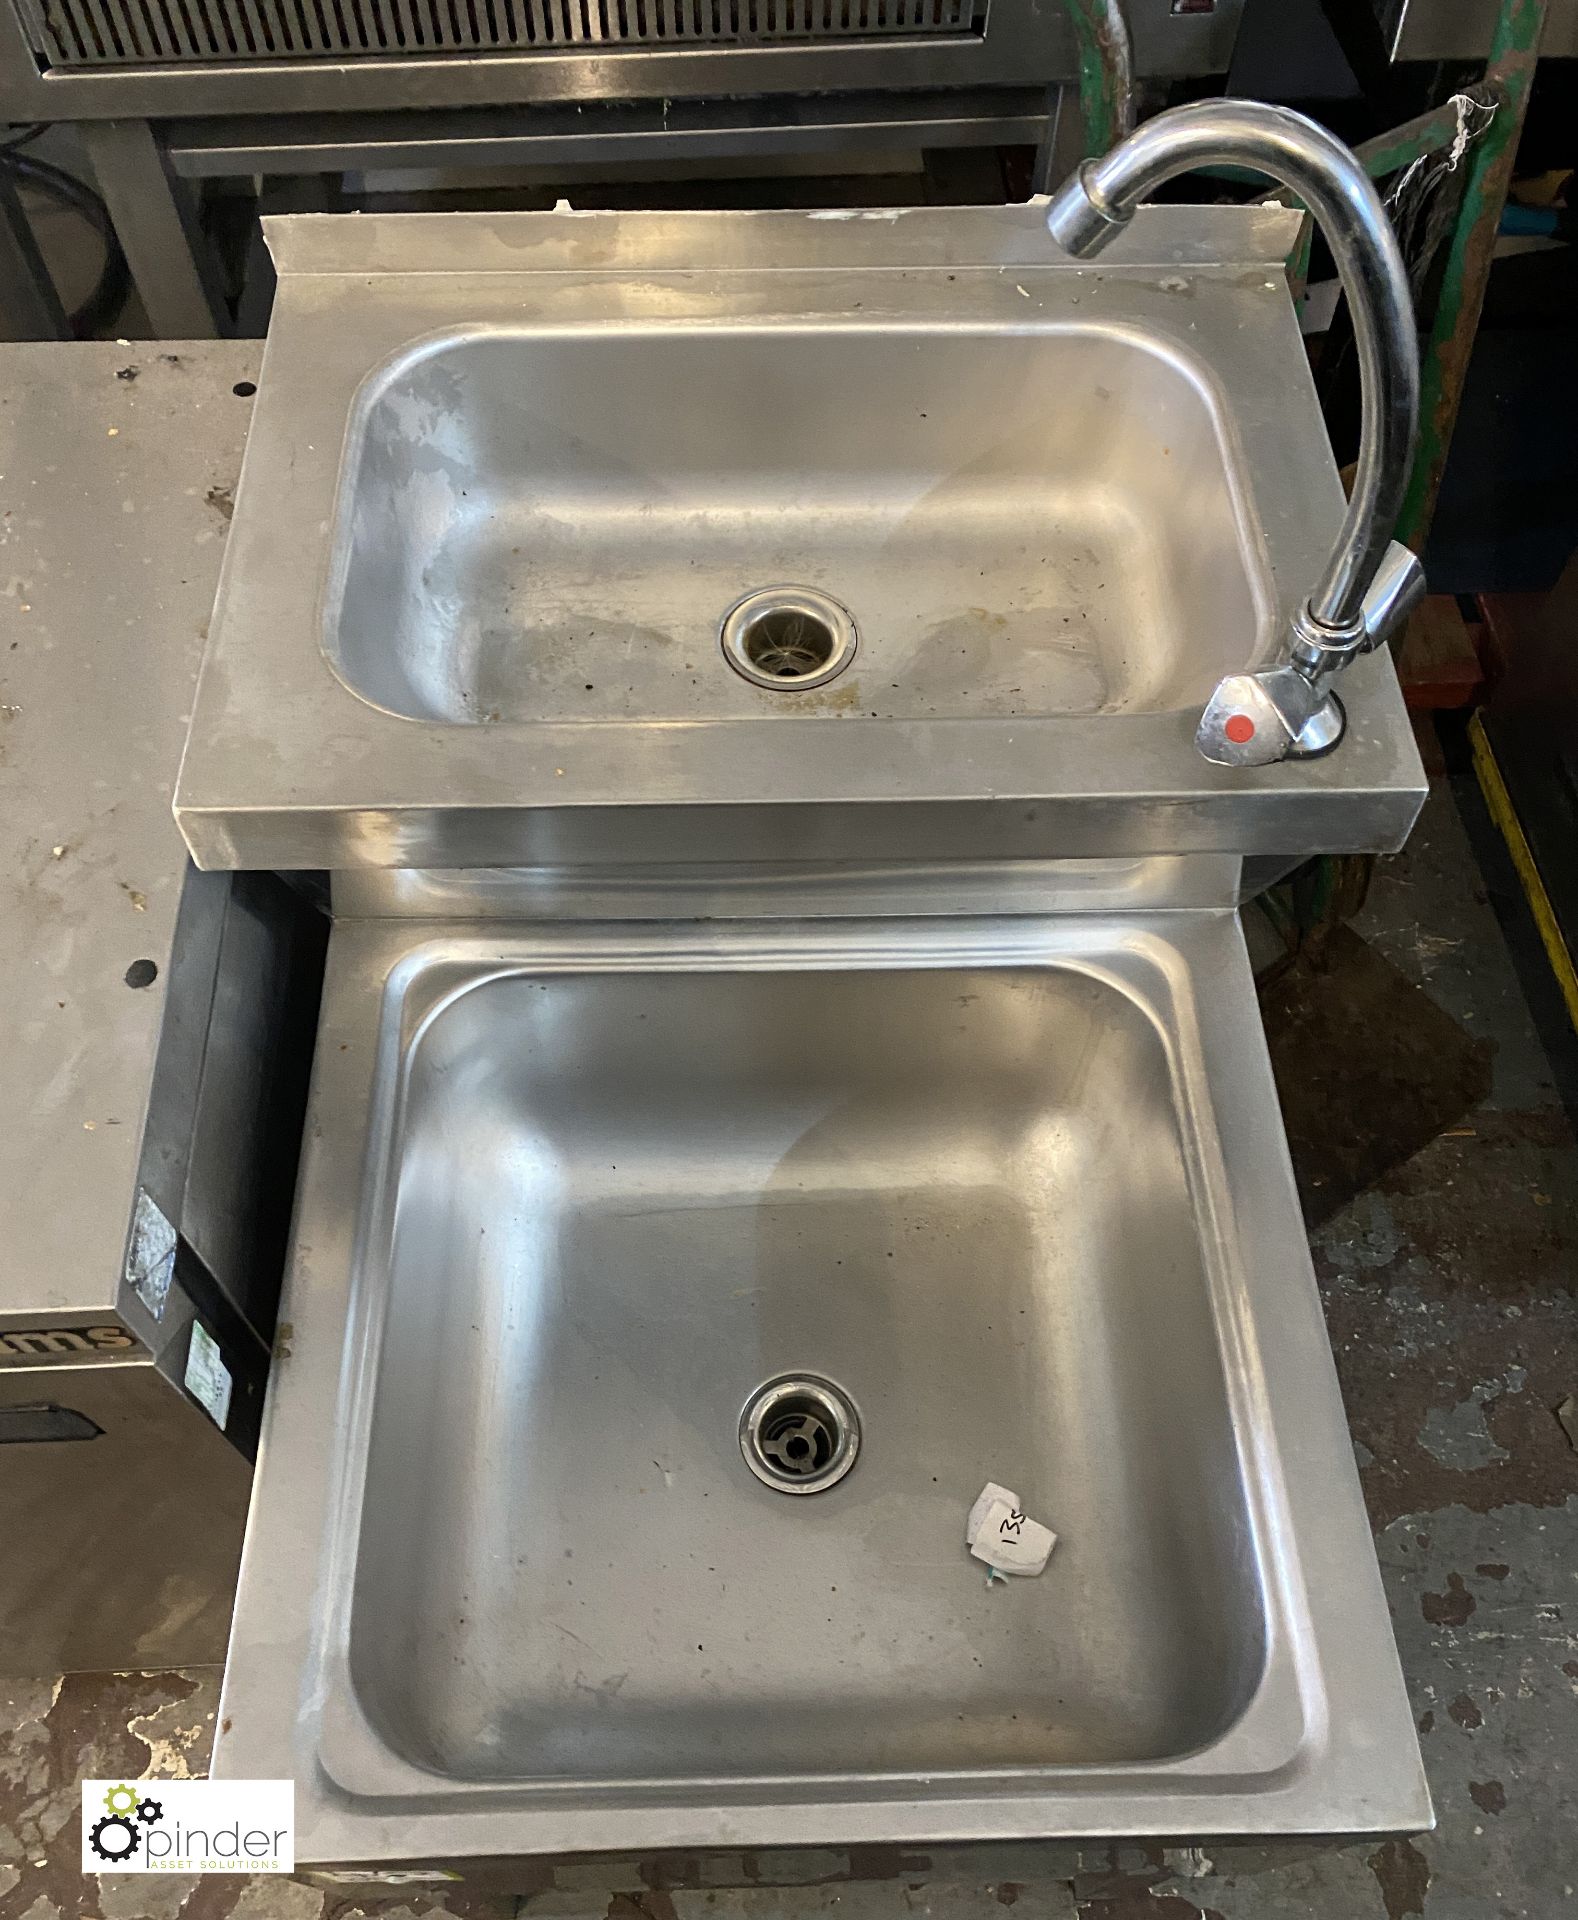 Stainless steel twin bowl Sluice Sink, 500mm x 700mm x 870mm - Image 3 of 4